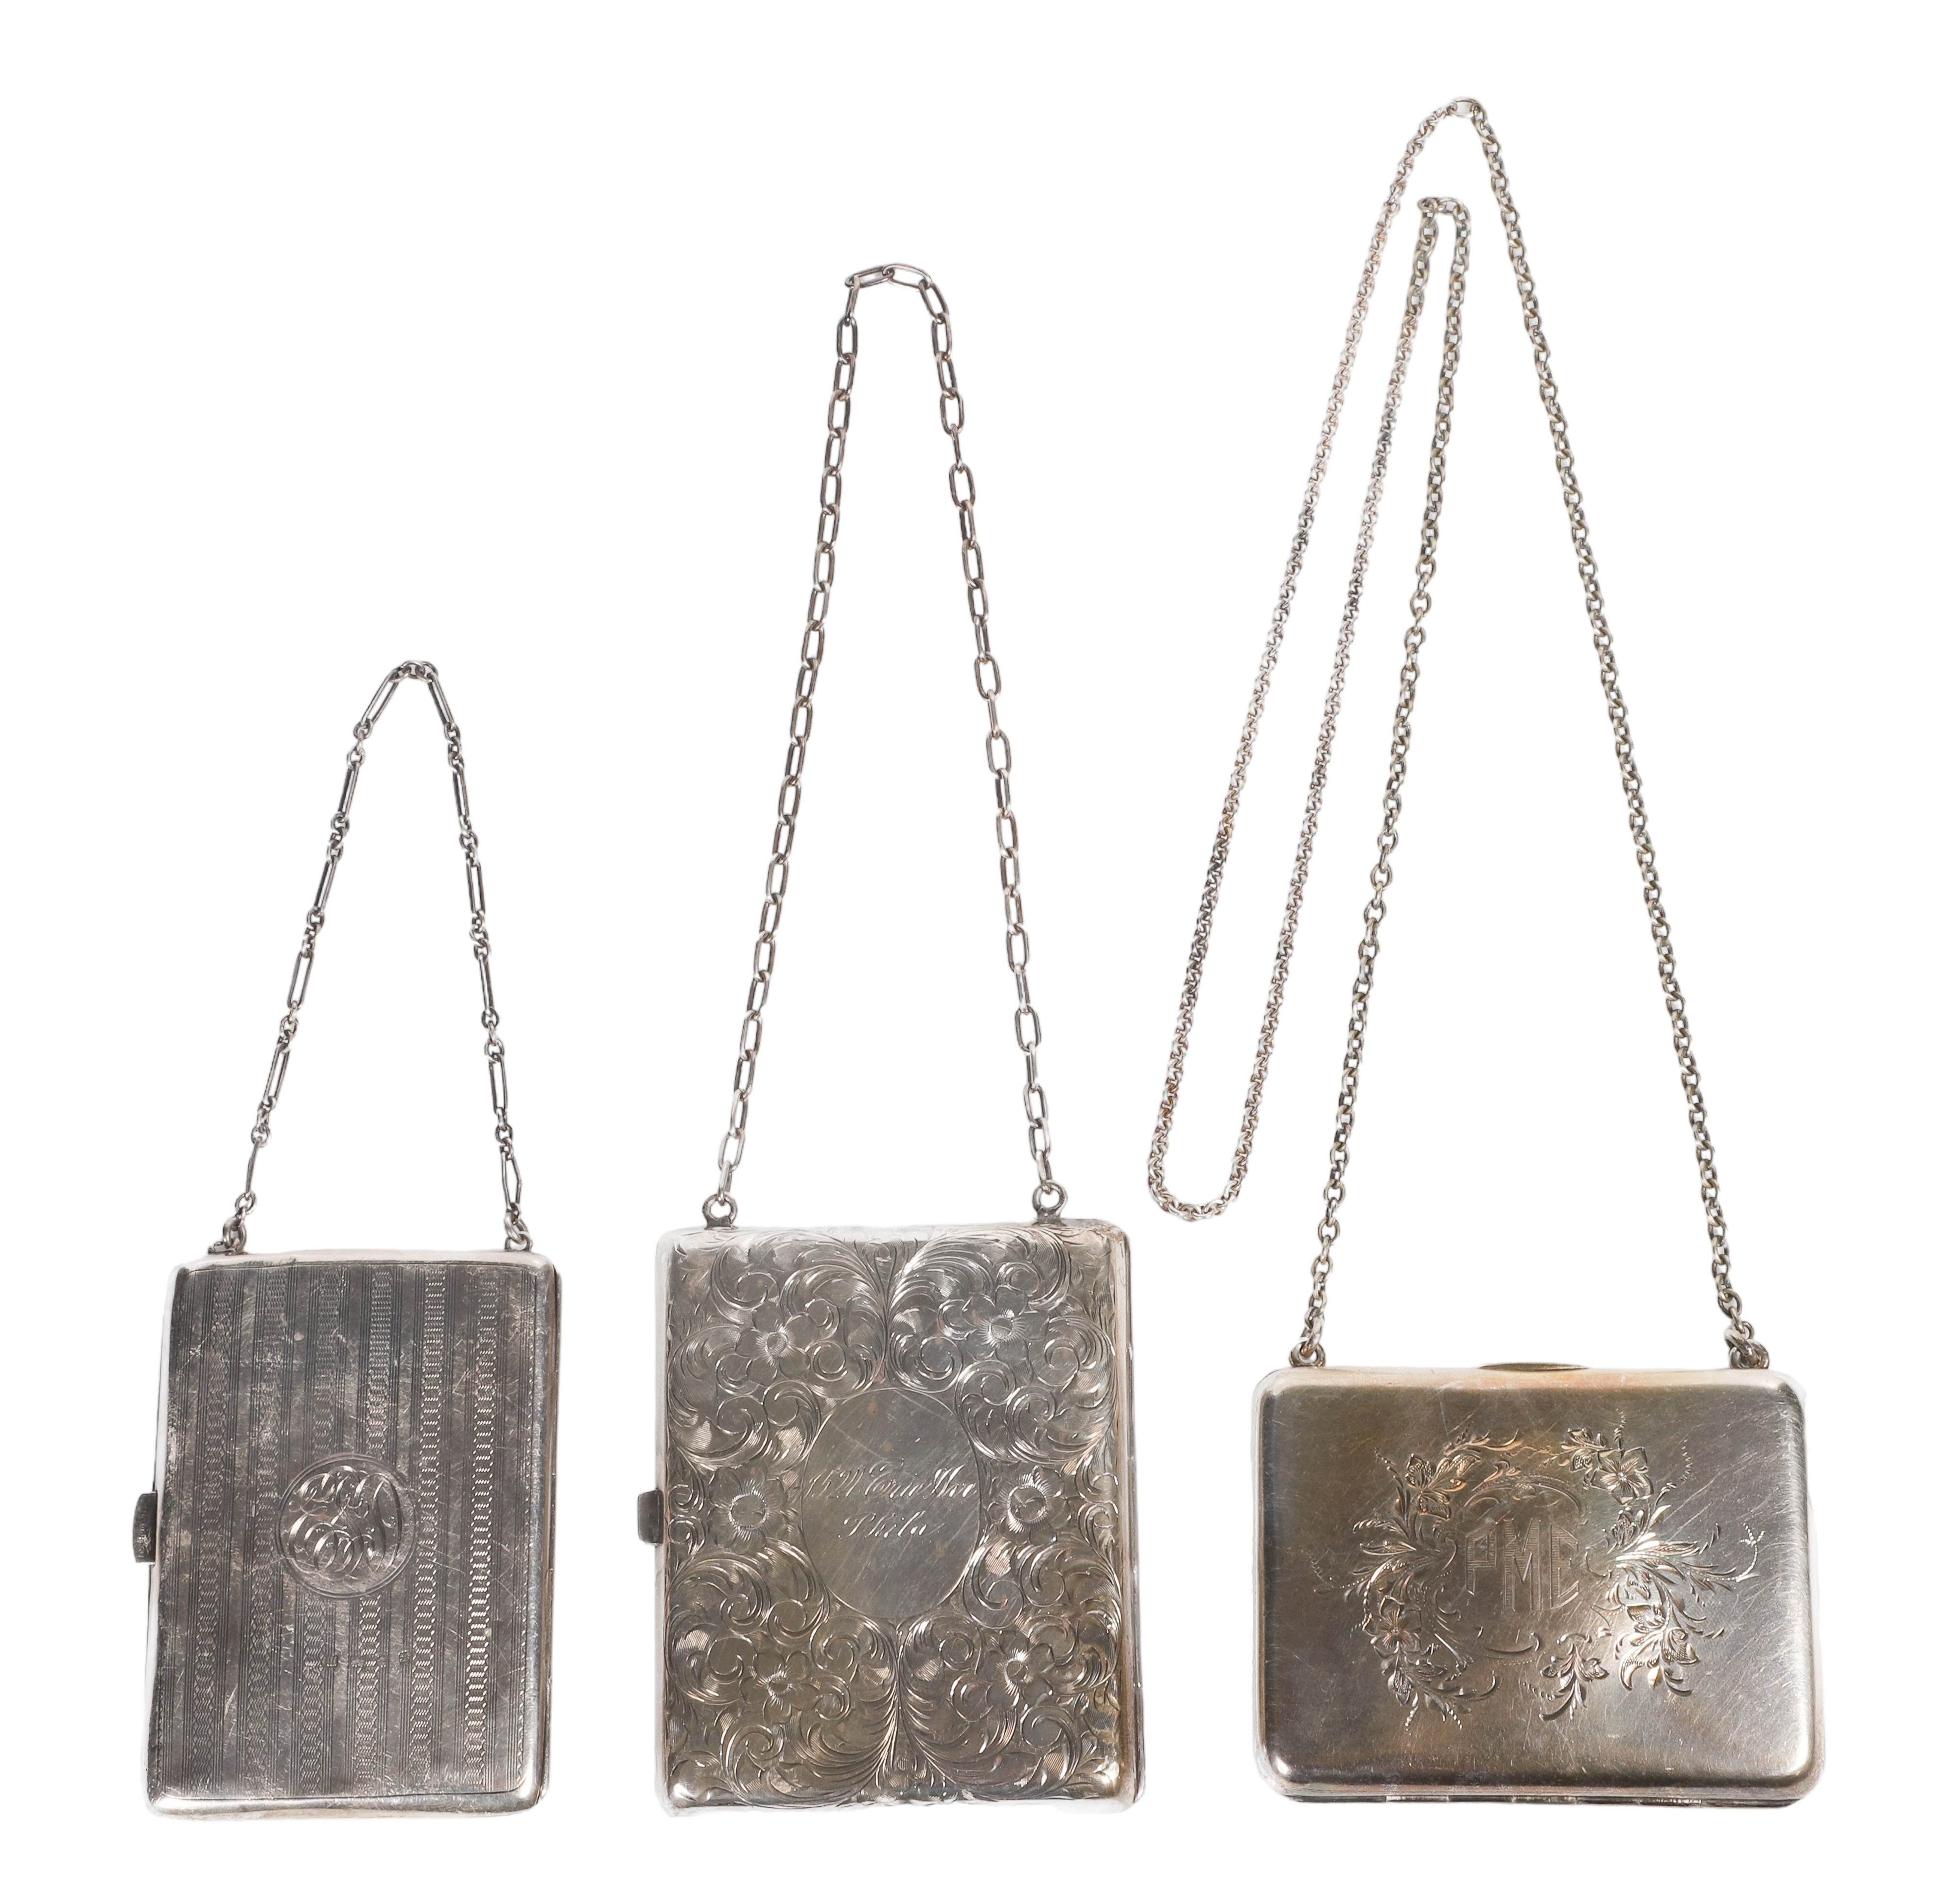  3 Sterling purses to include 2e155c